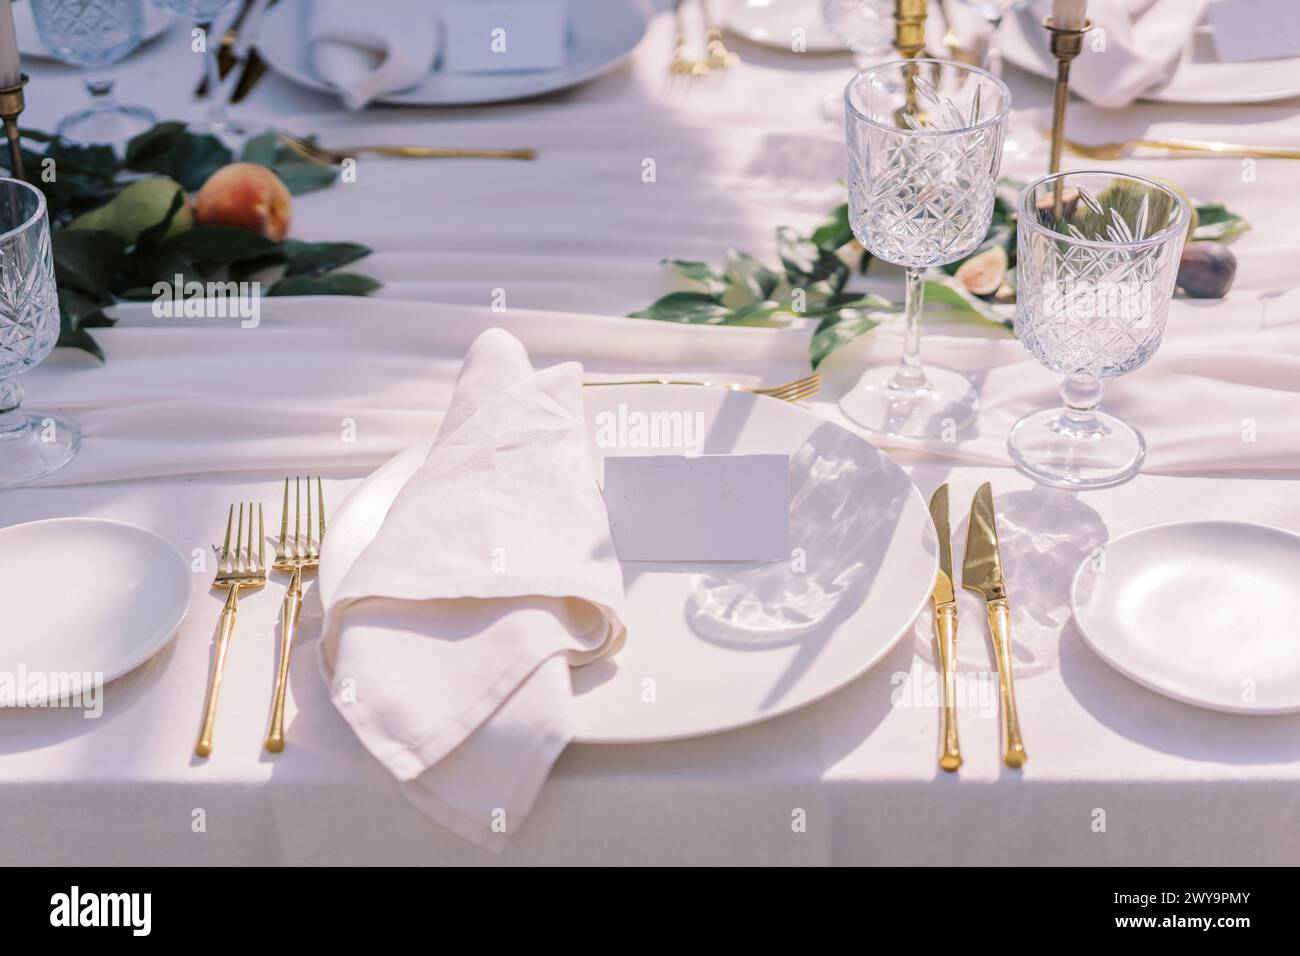 Sophisticated table setting with gold cutlery Stock Photo